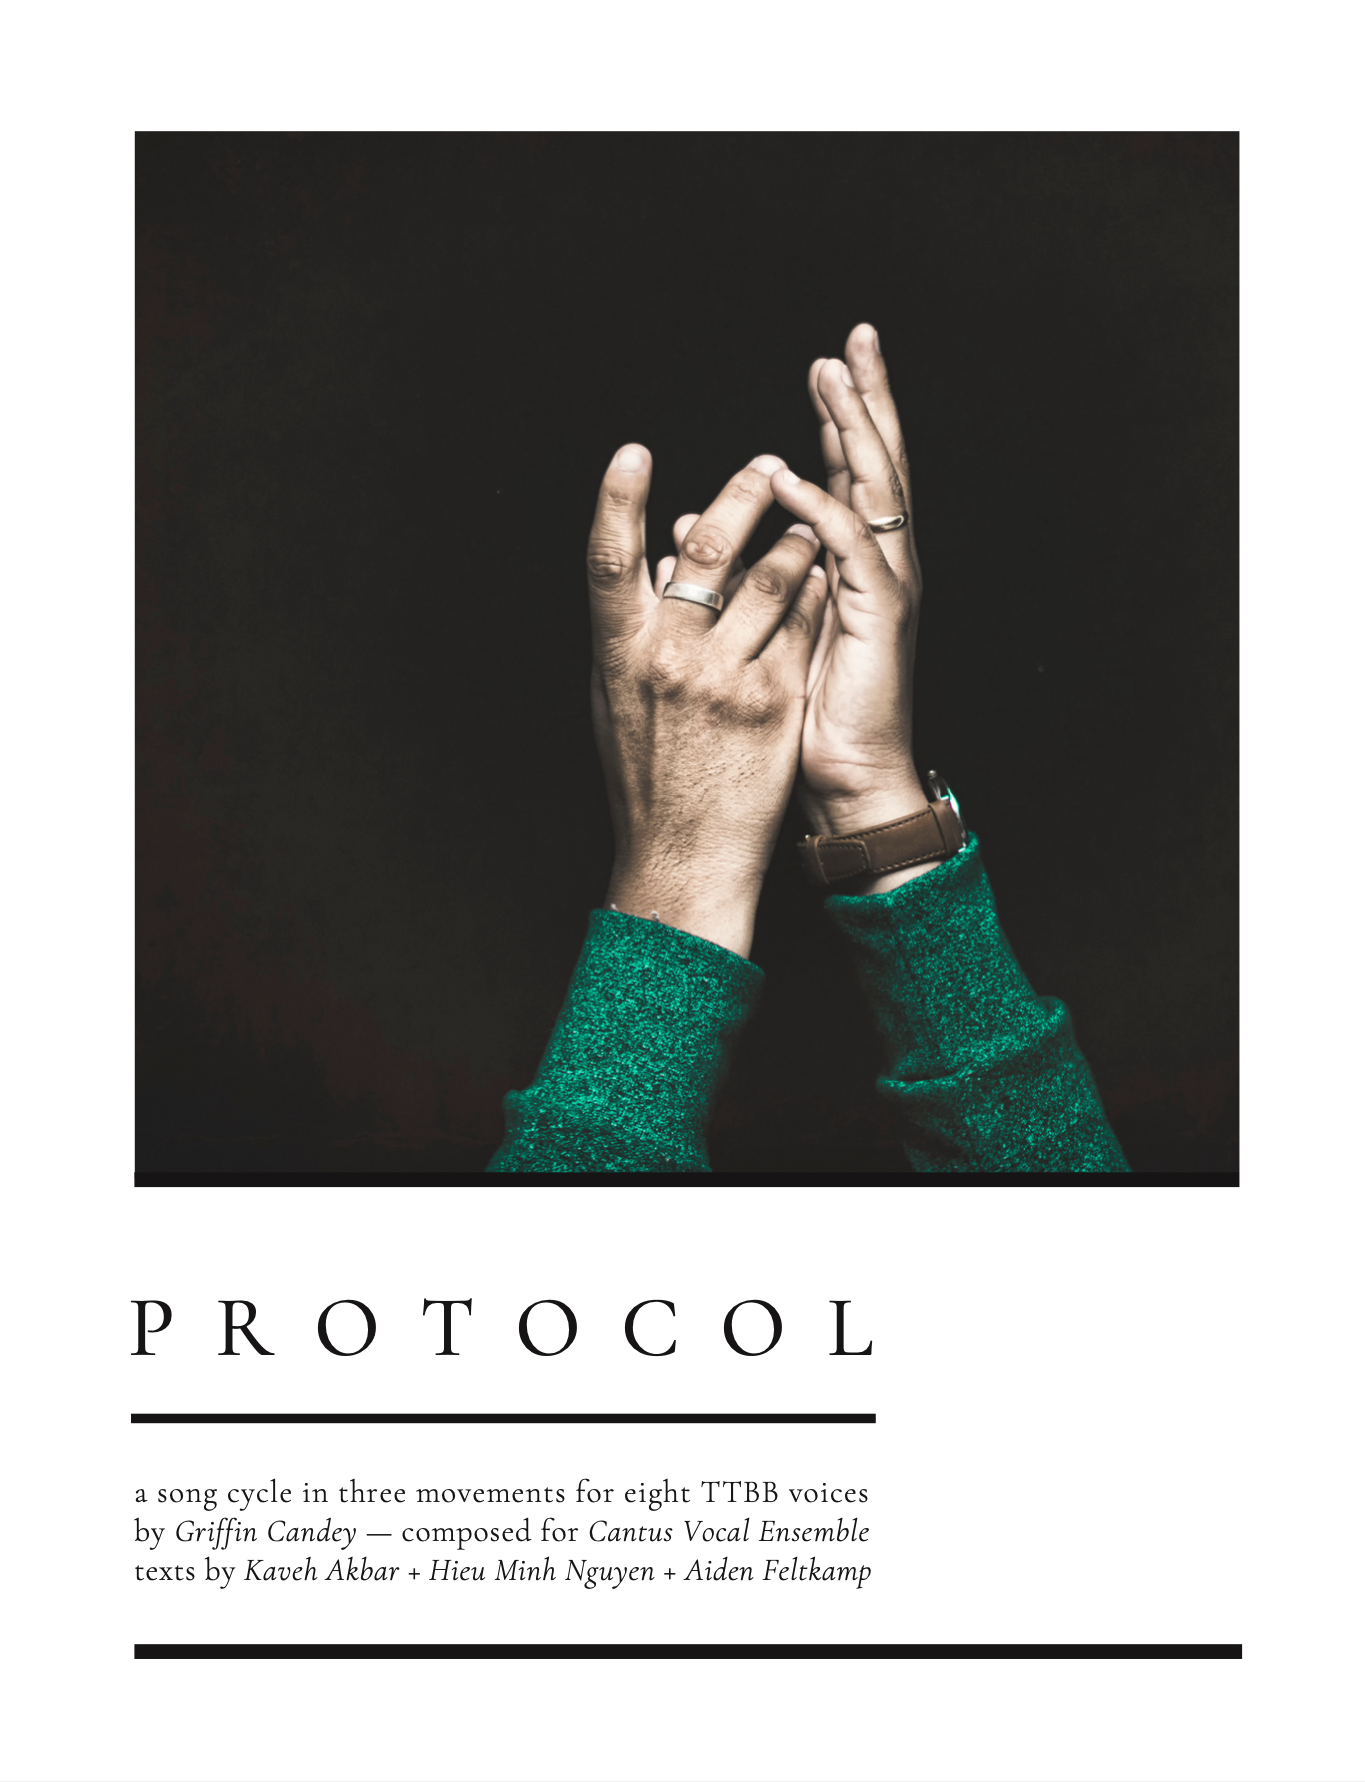 Protocol by Griffin Candey